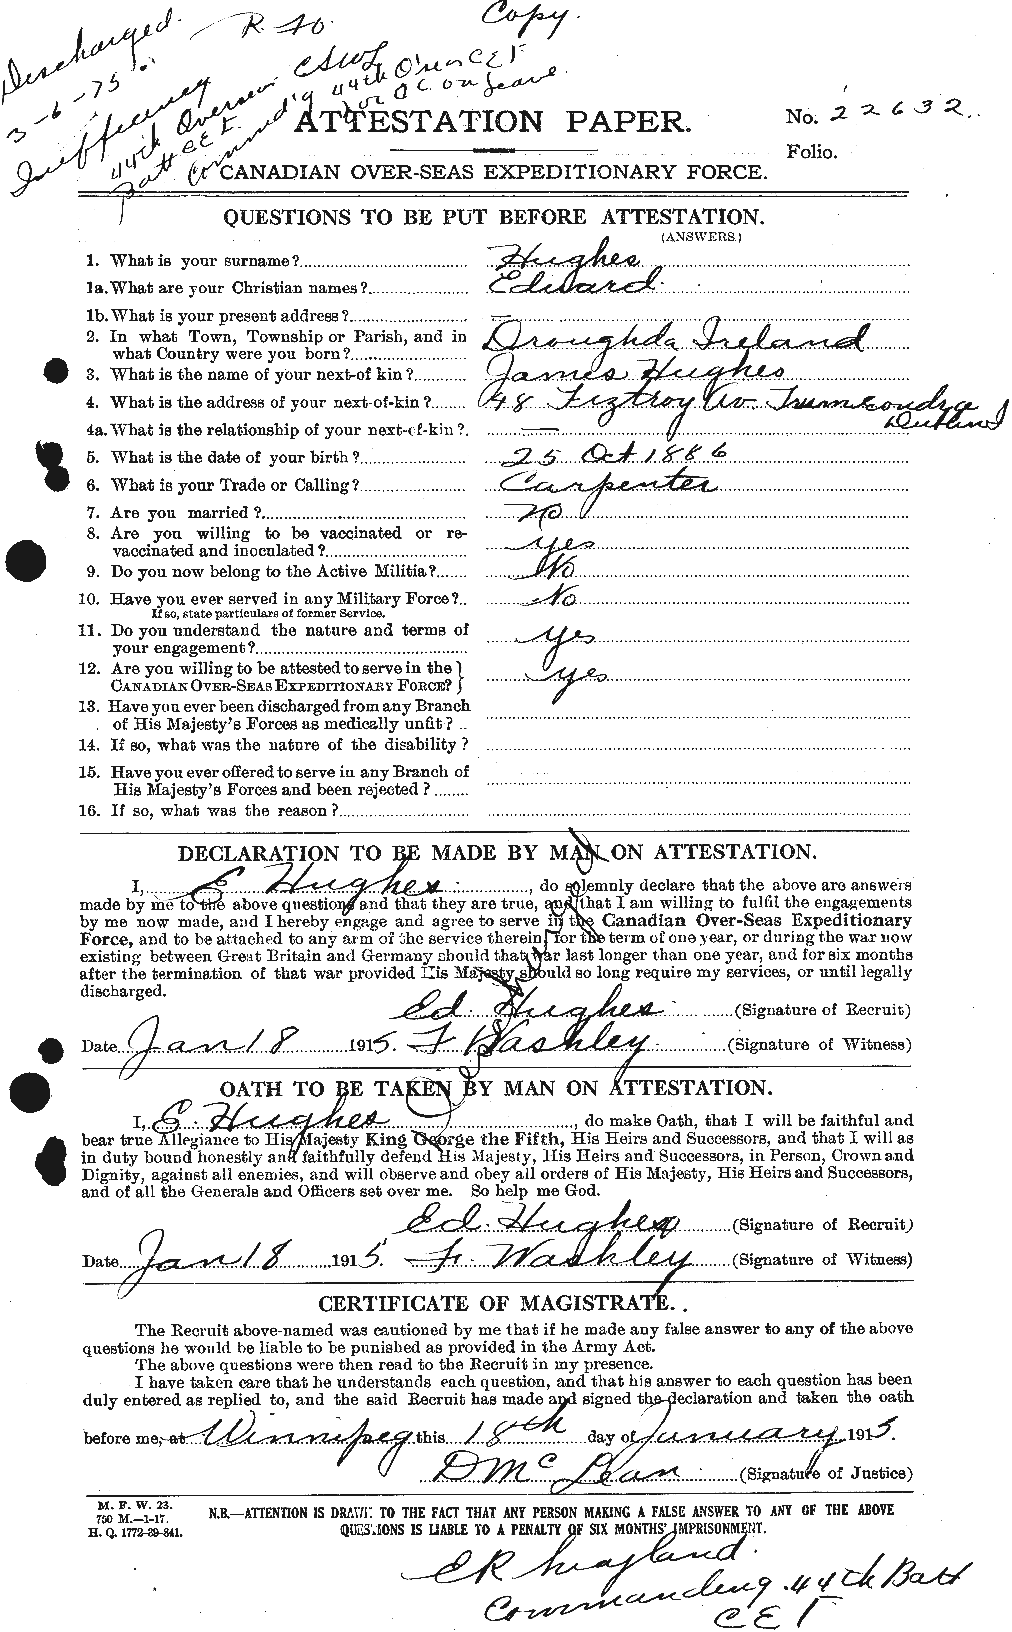 Personnel Records of the First World War - CEF 402661a